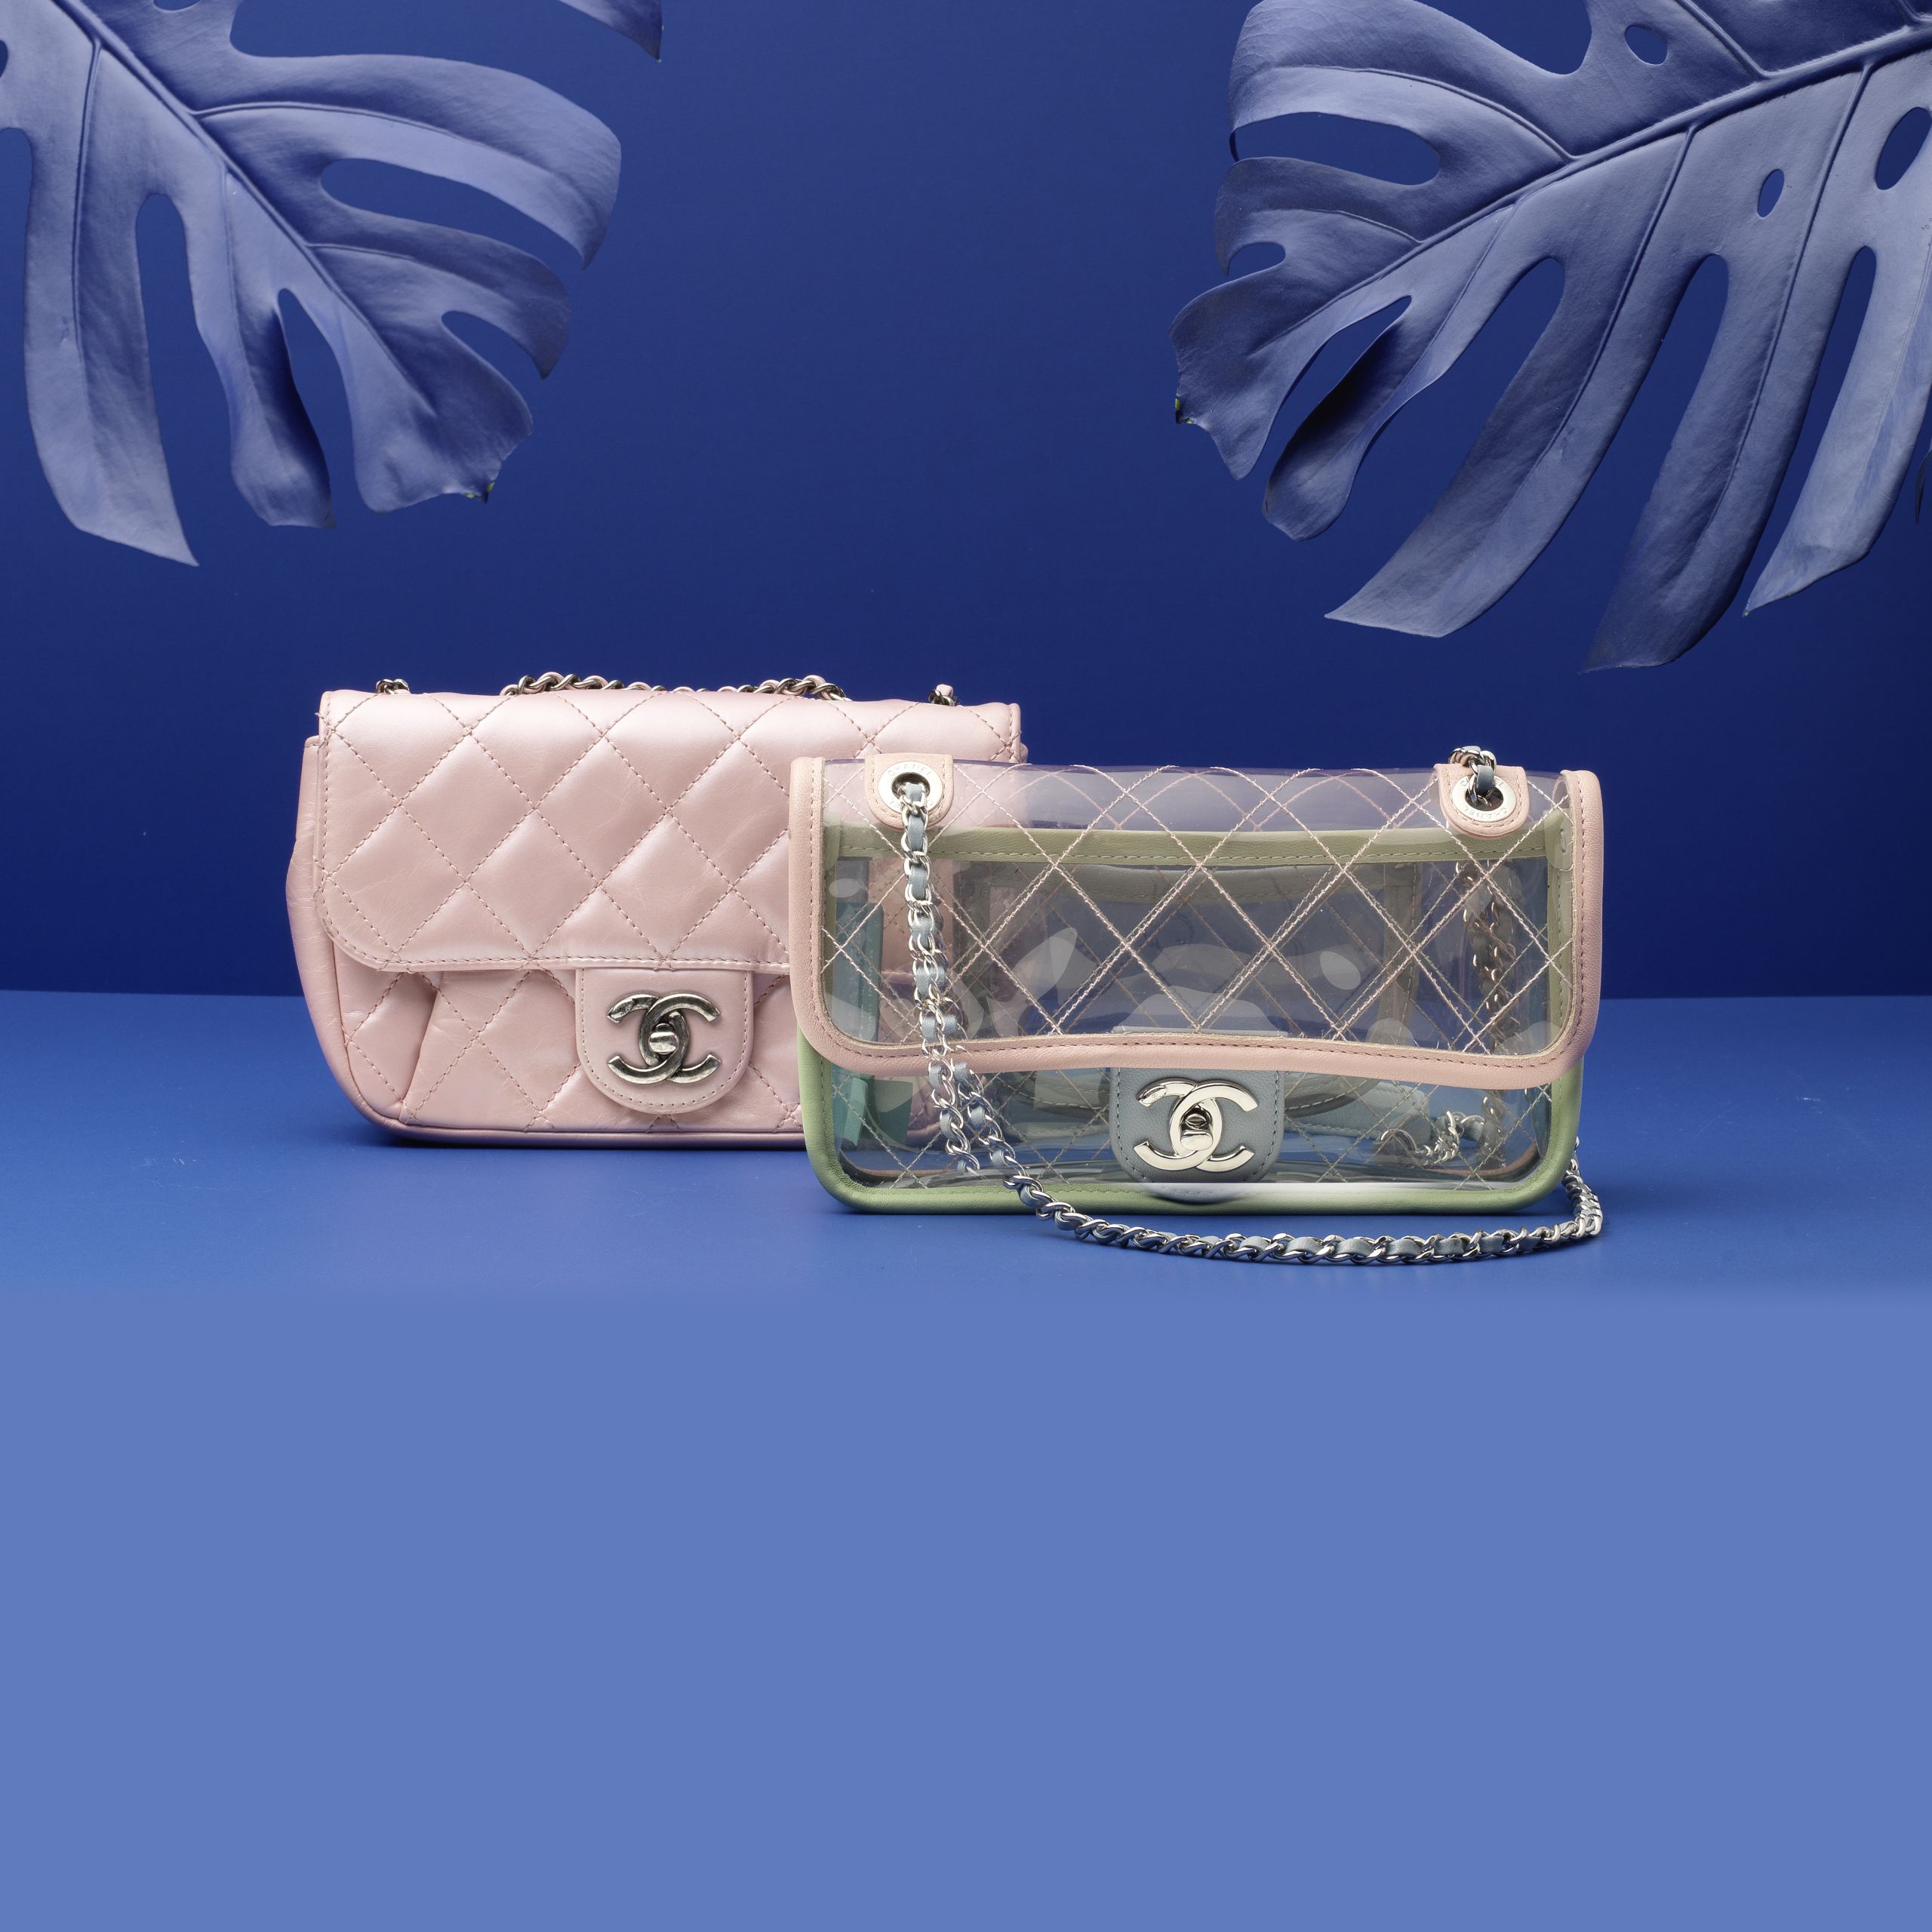 The Chanel Pink Quiz - Can You Identify Them?